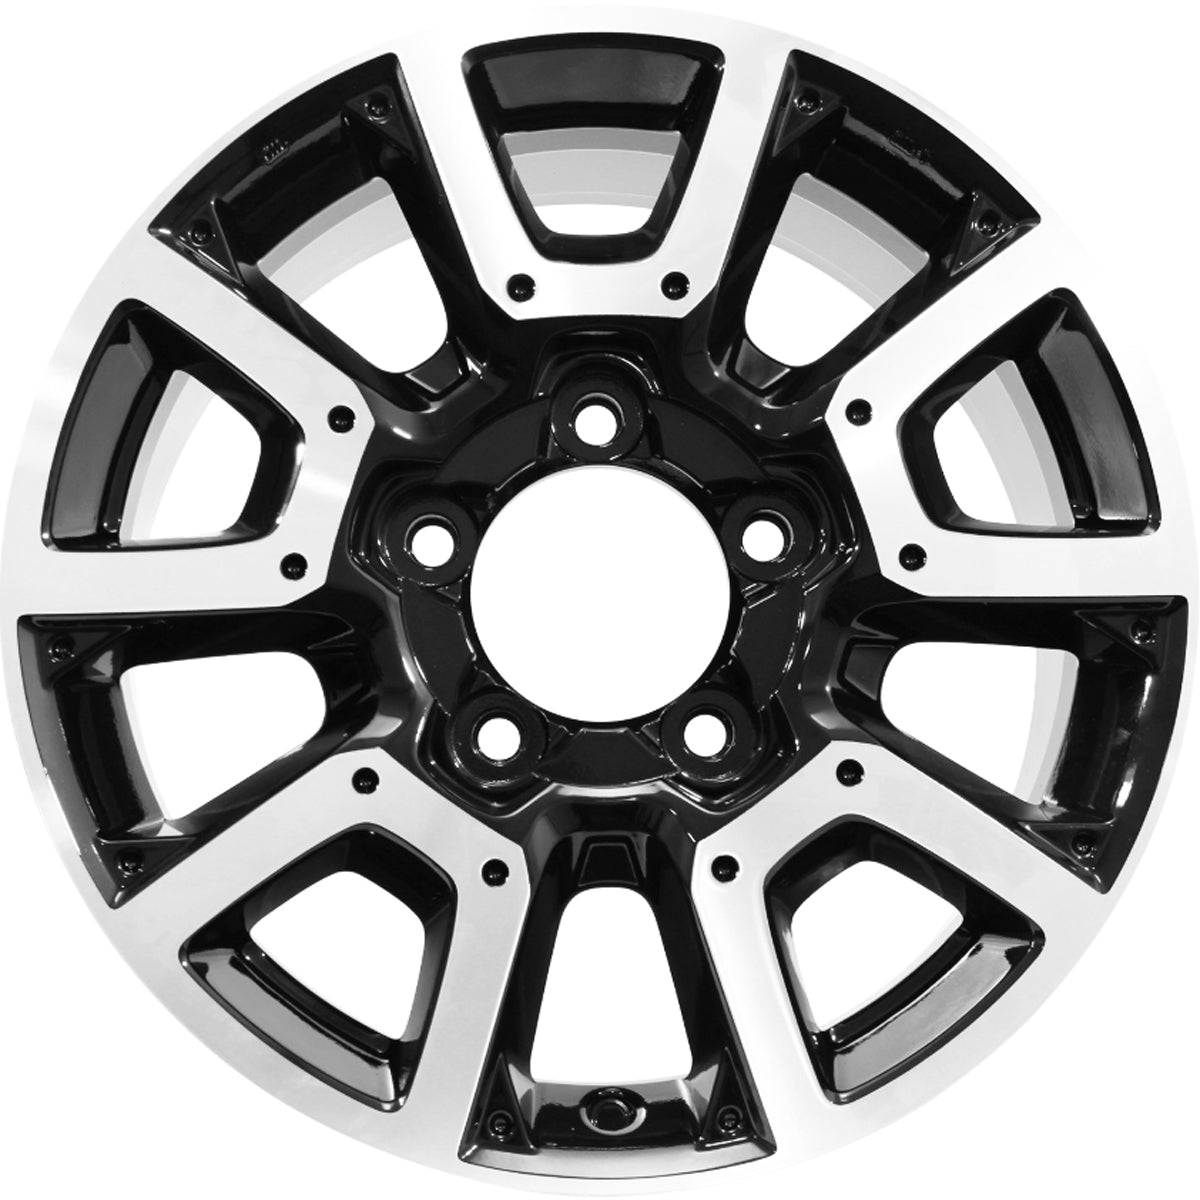 New 18" 2014-2021 Toyota Tundra Replacement Alloy Wheel - 75157